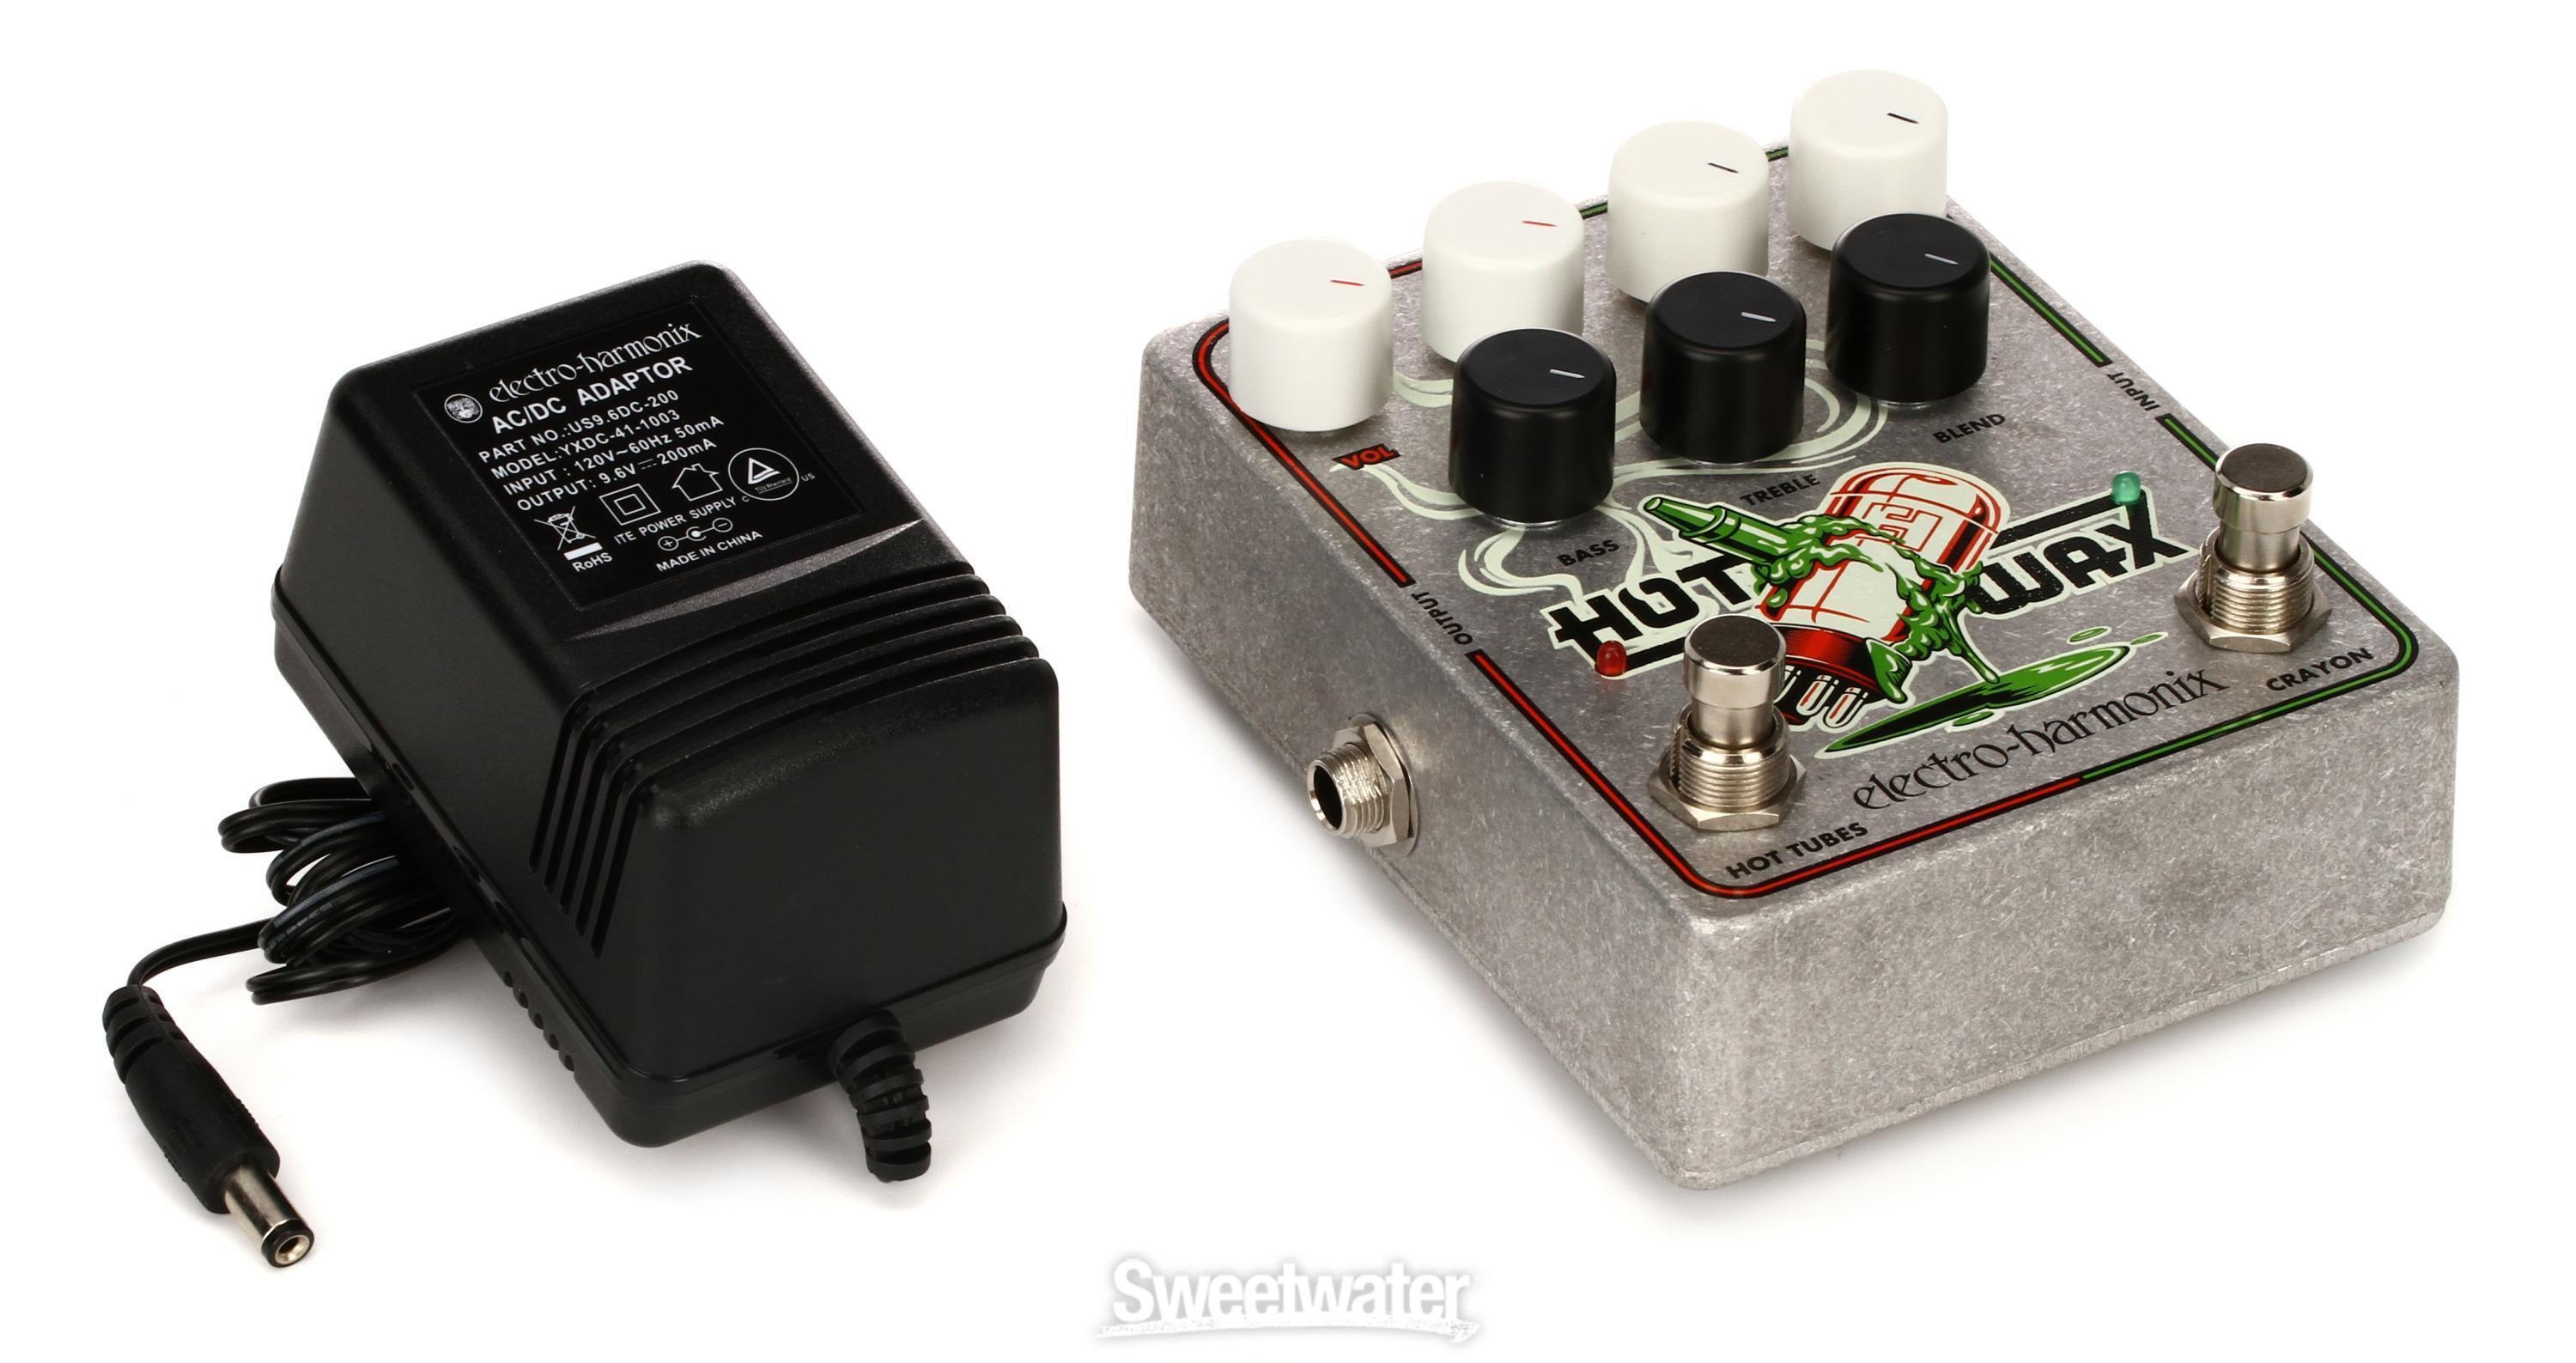 Electro-Harmonix Hot Wax Dual Overdrive Pedal | Sweetwater